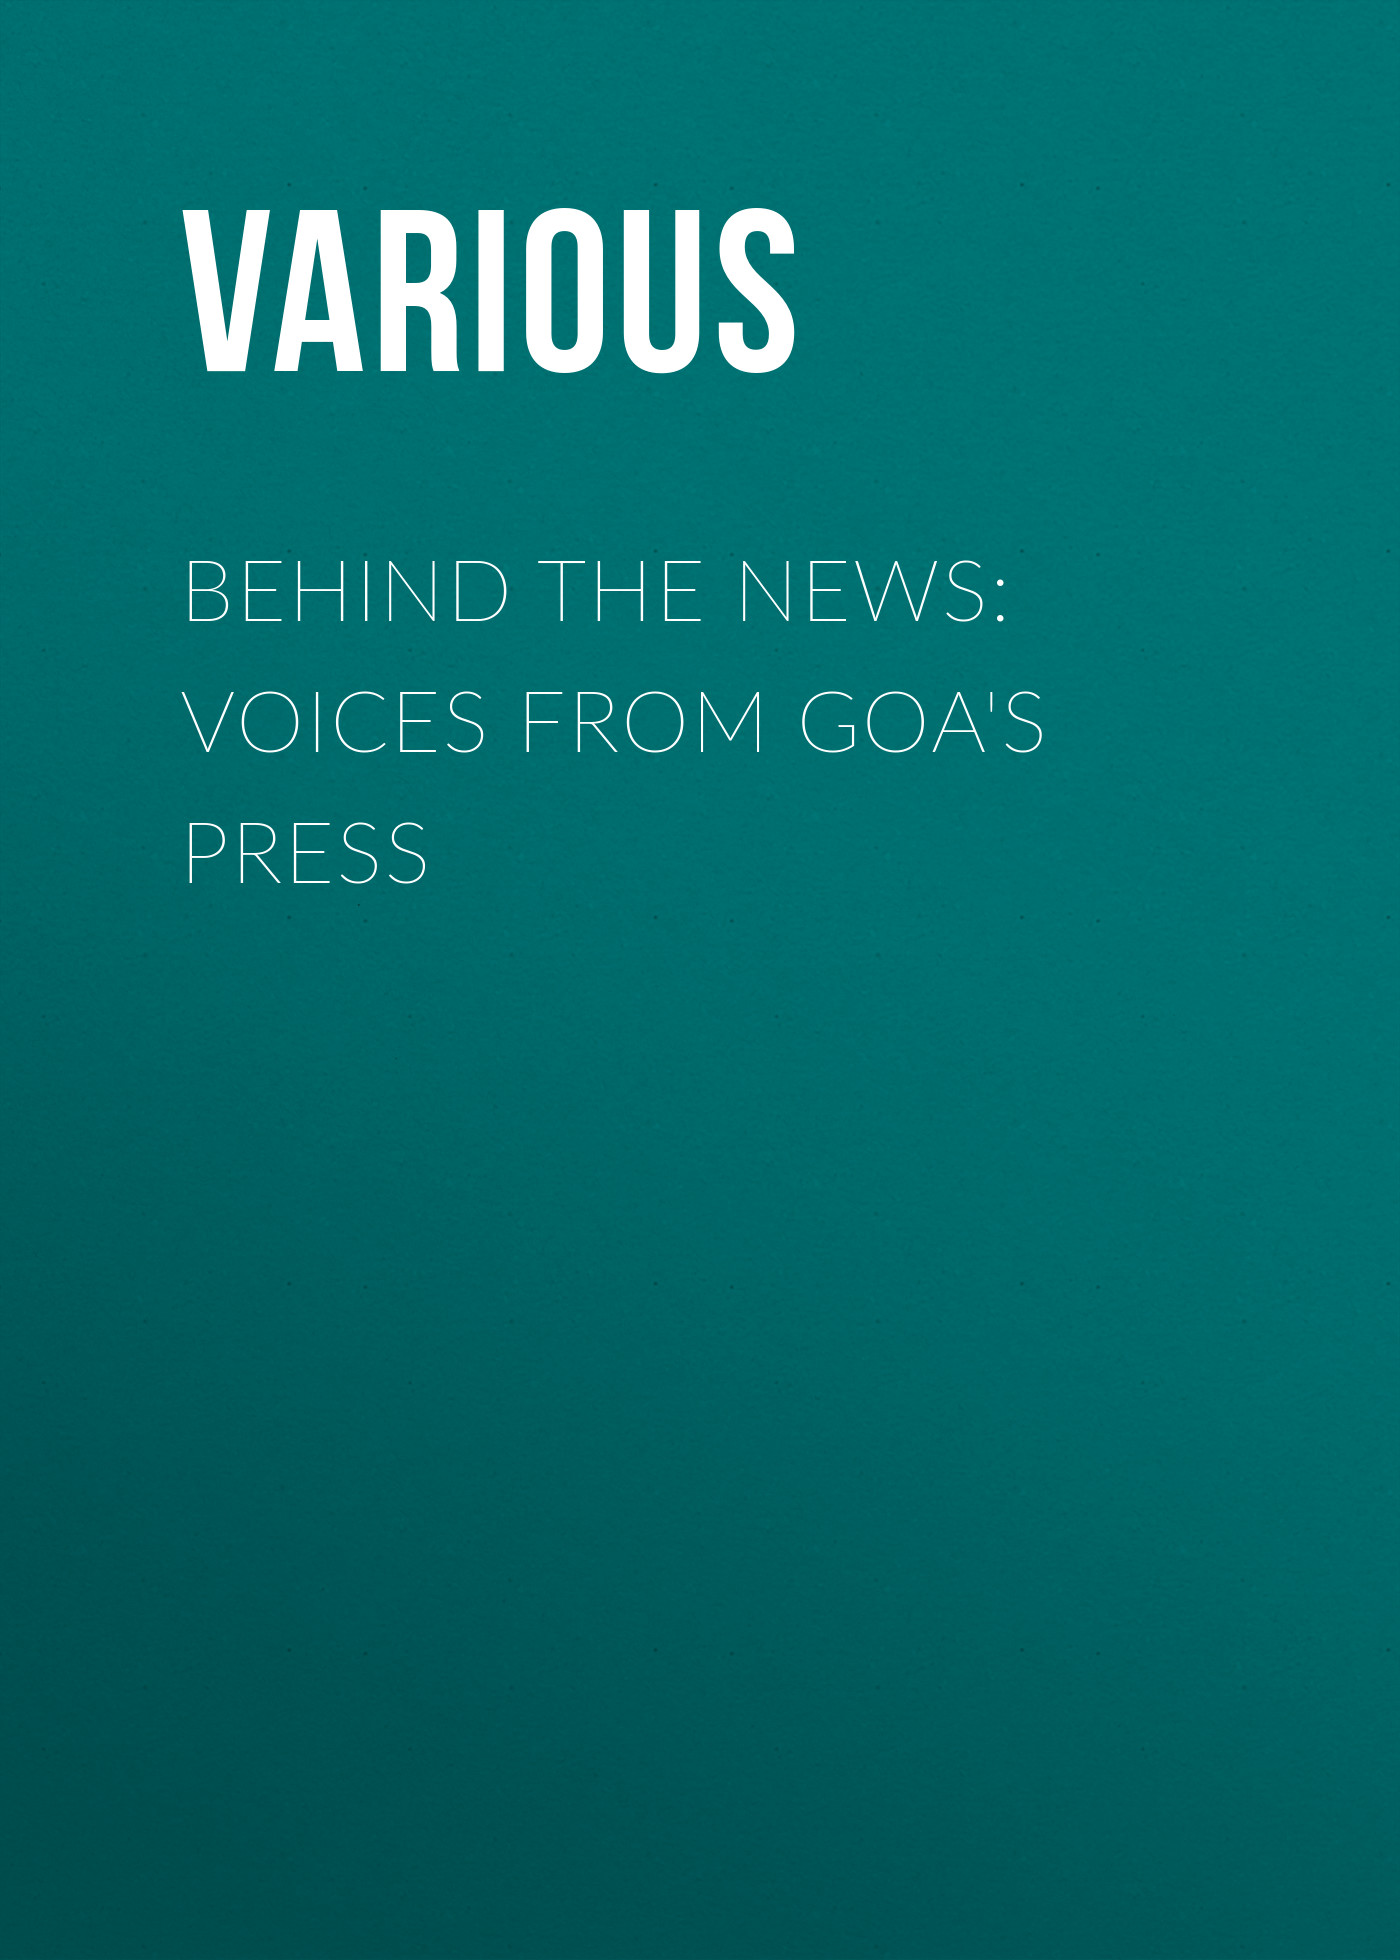 Behind the News: Voices from Goa's Press